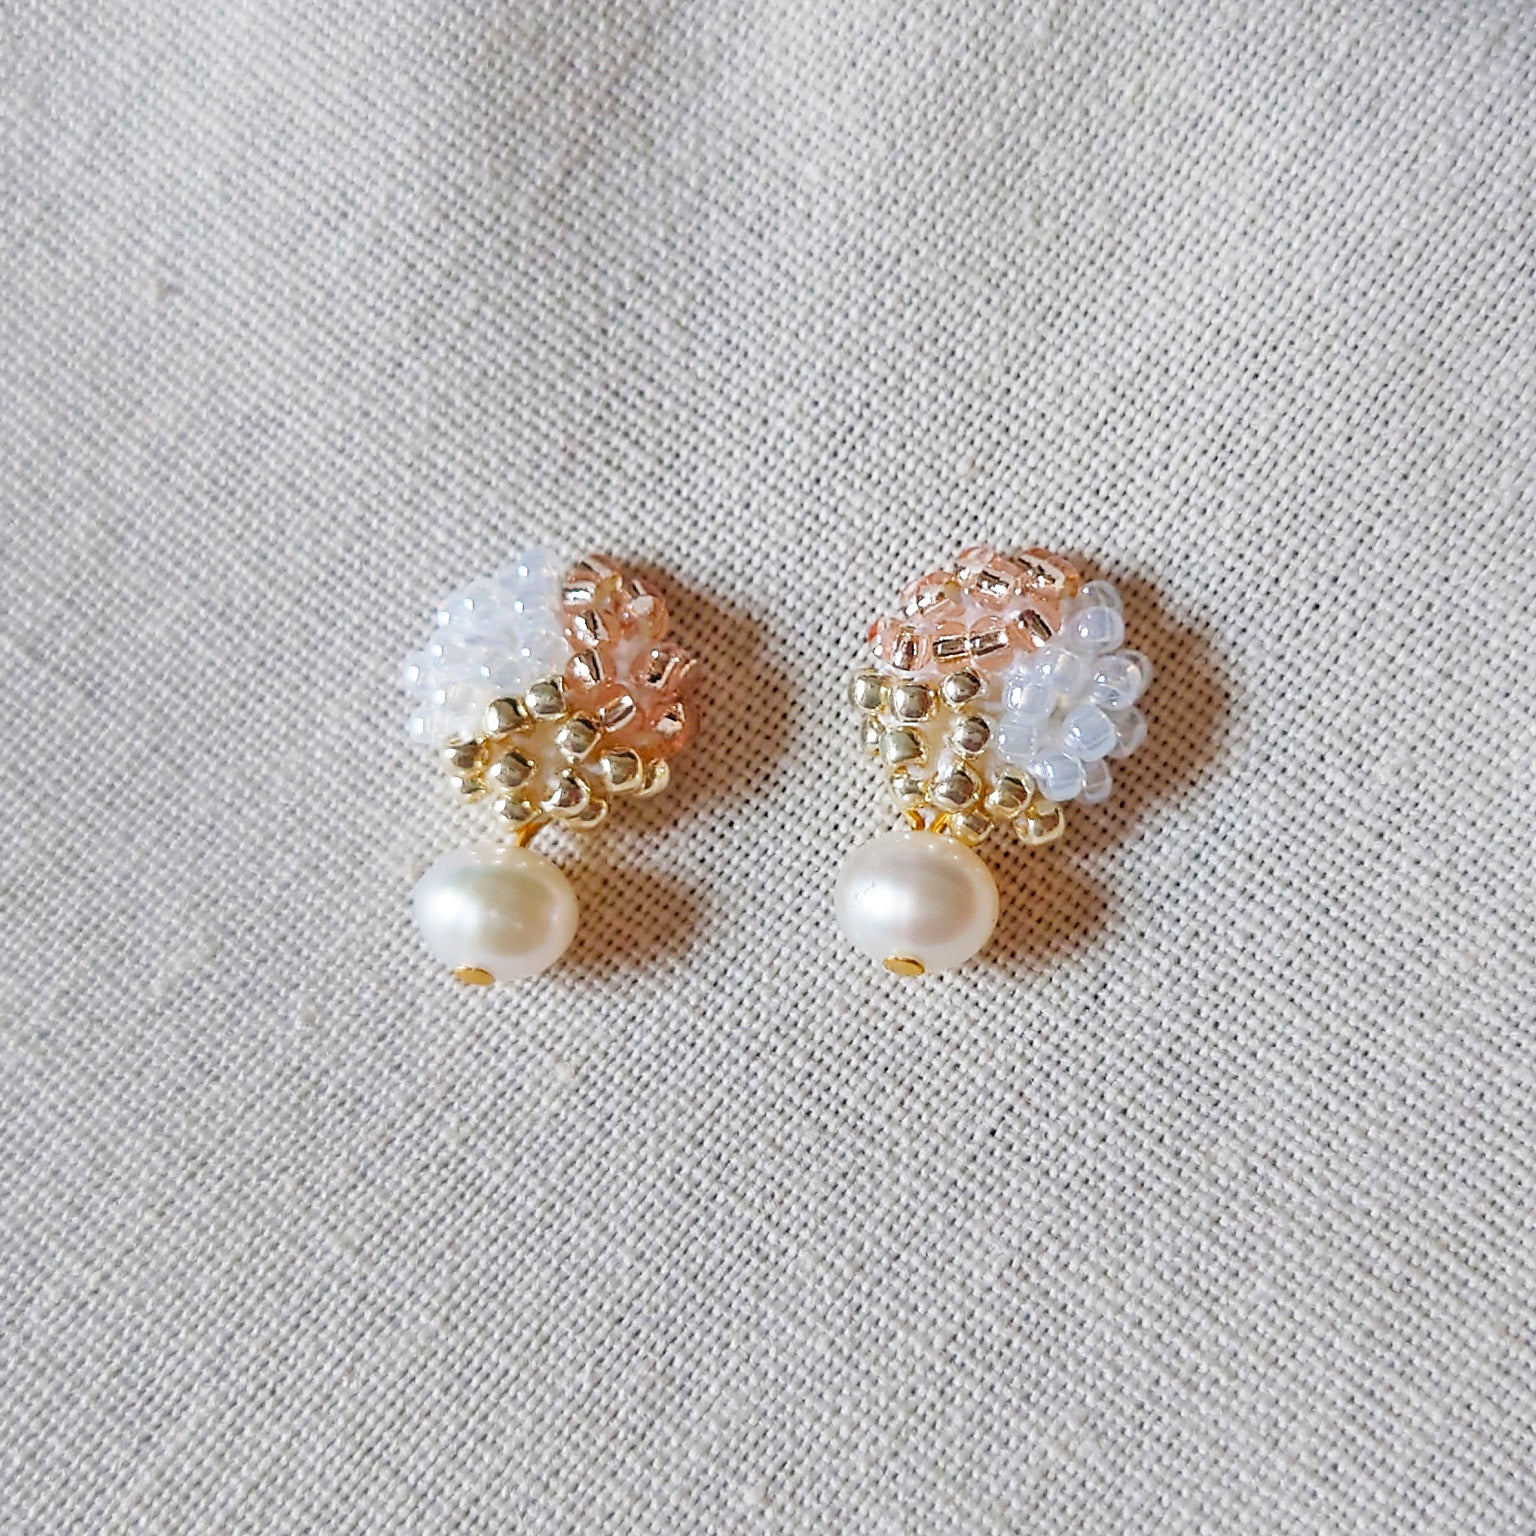 Phoebe Trio Earrings in Champagne Pink Front 1